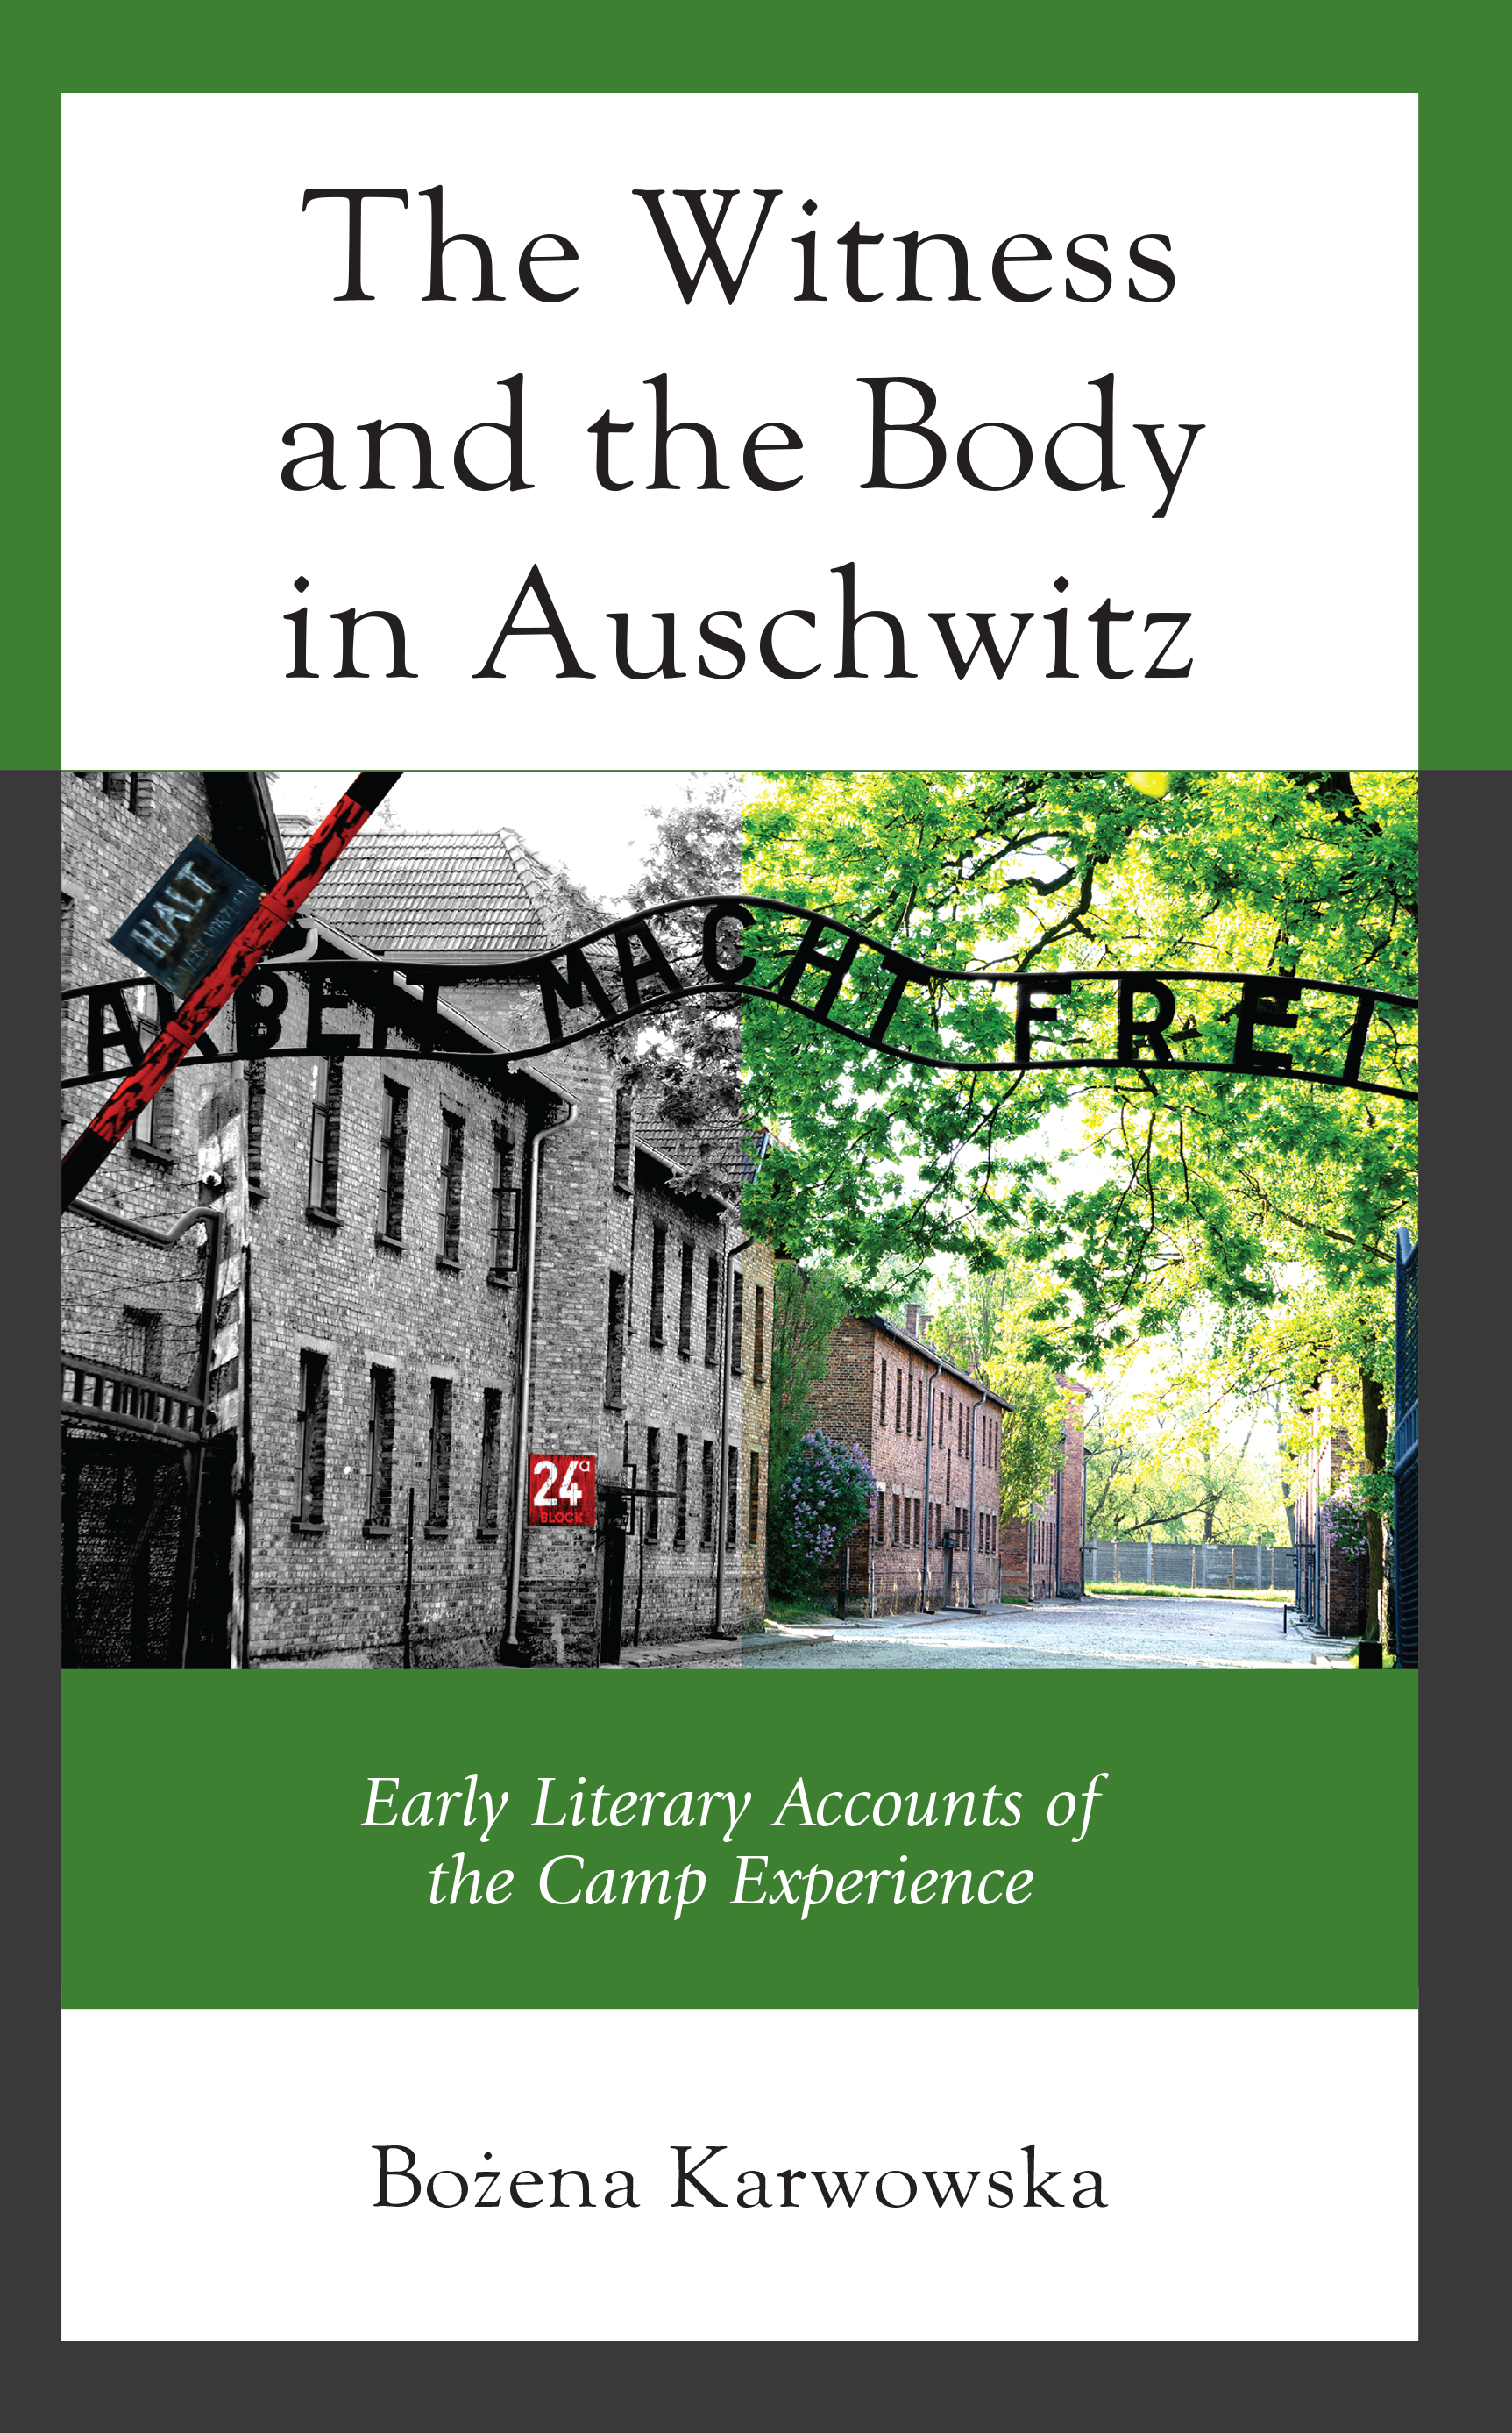 The Witness and the Body in Auschwitz: Early Literary Accounts of the Camp Experience